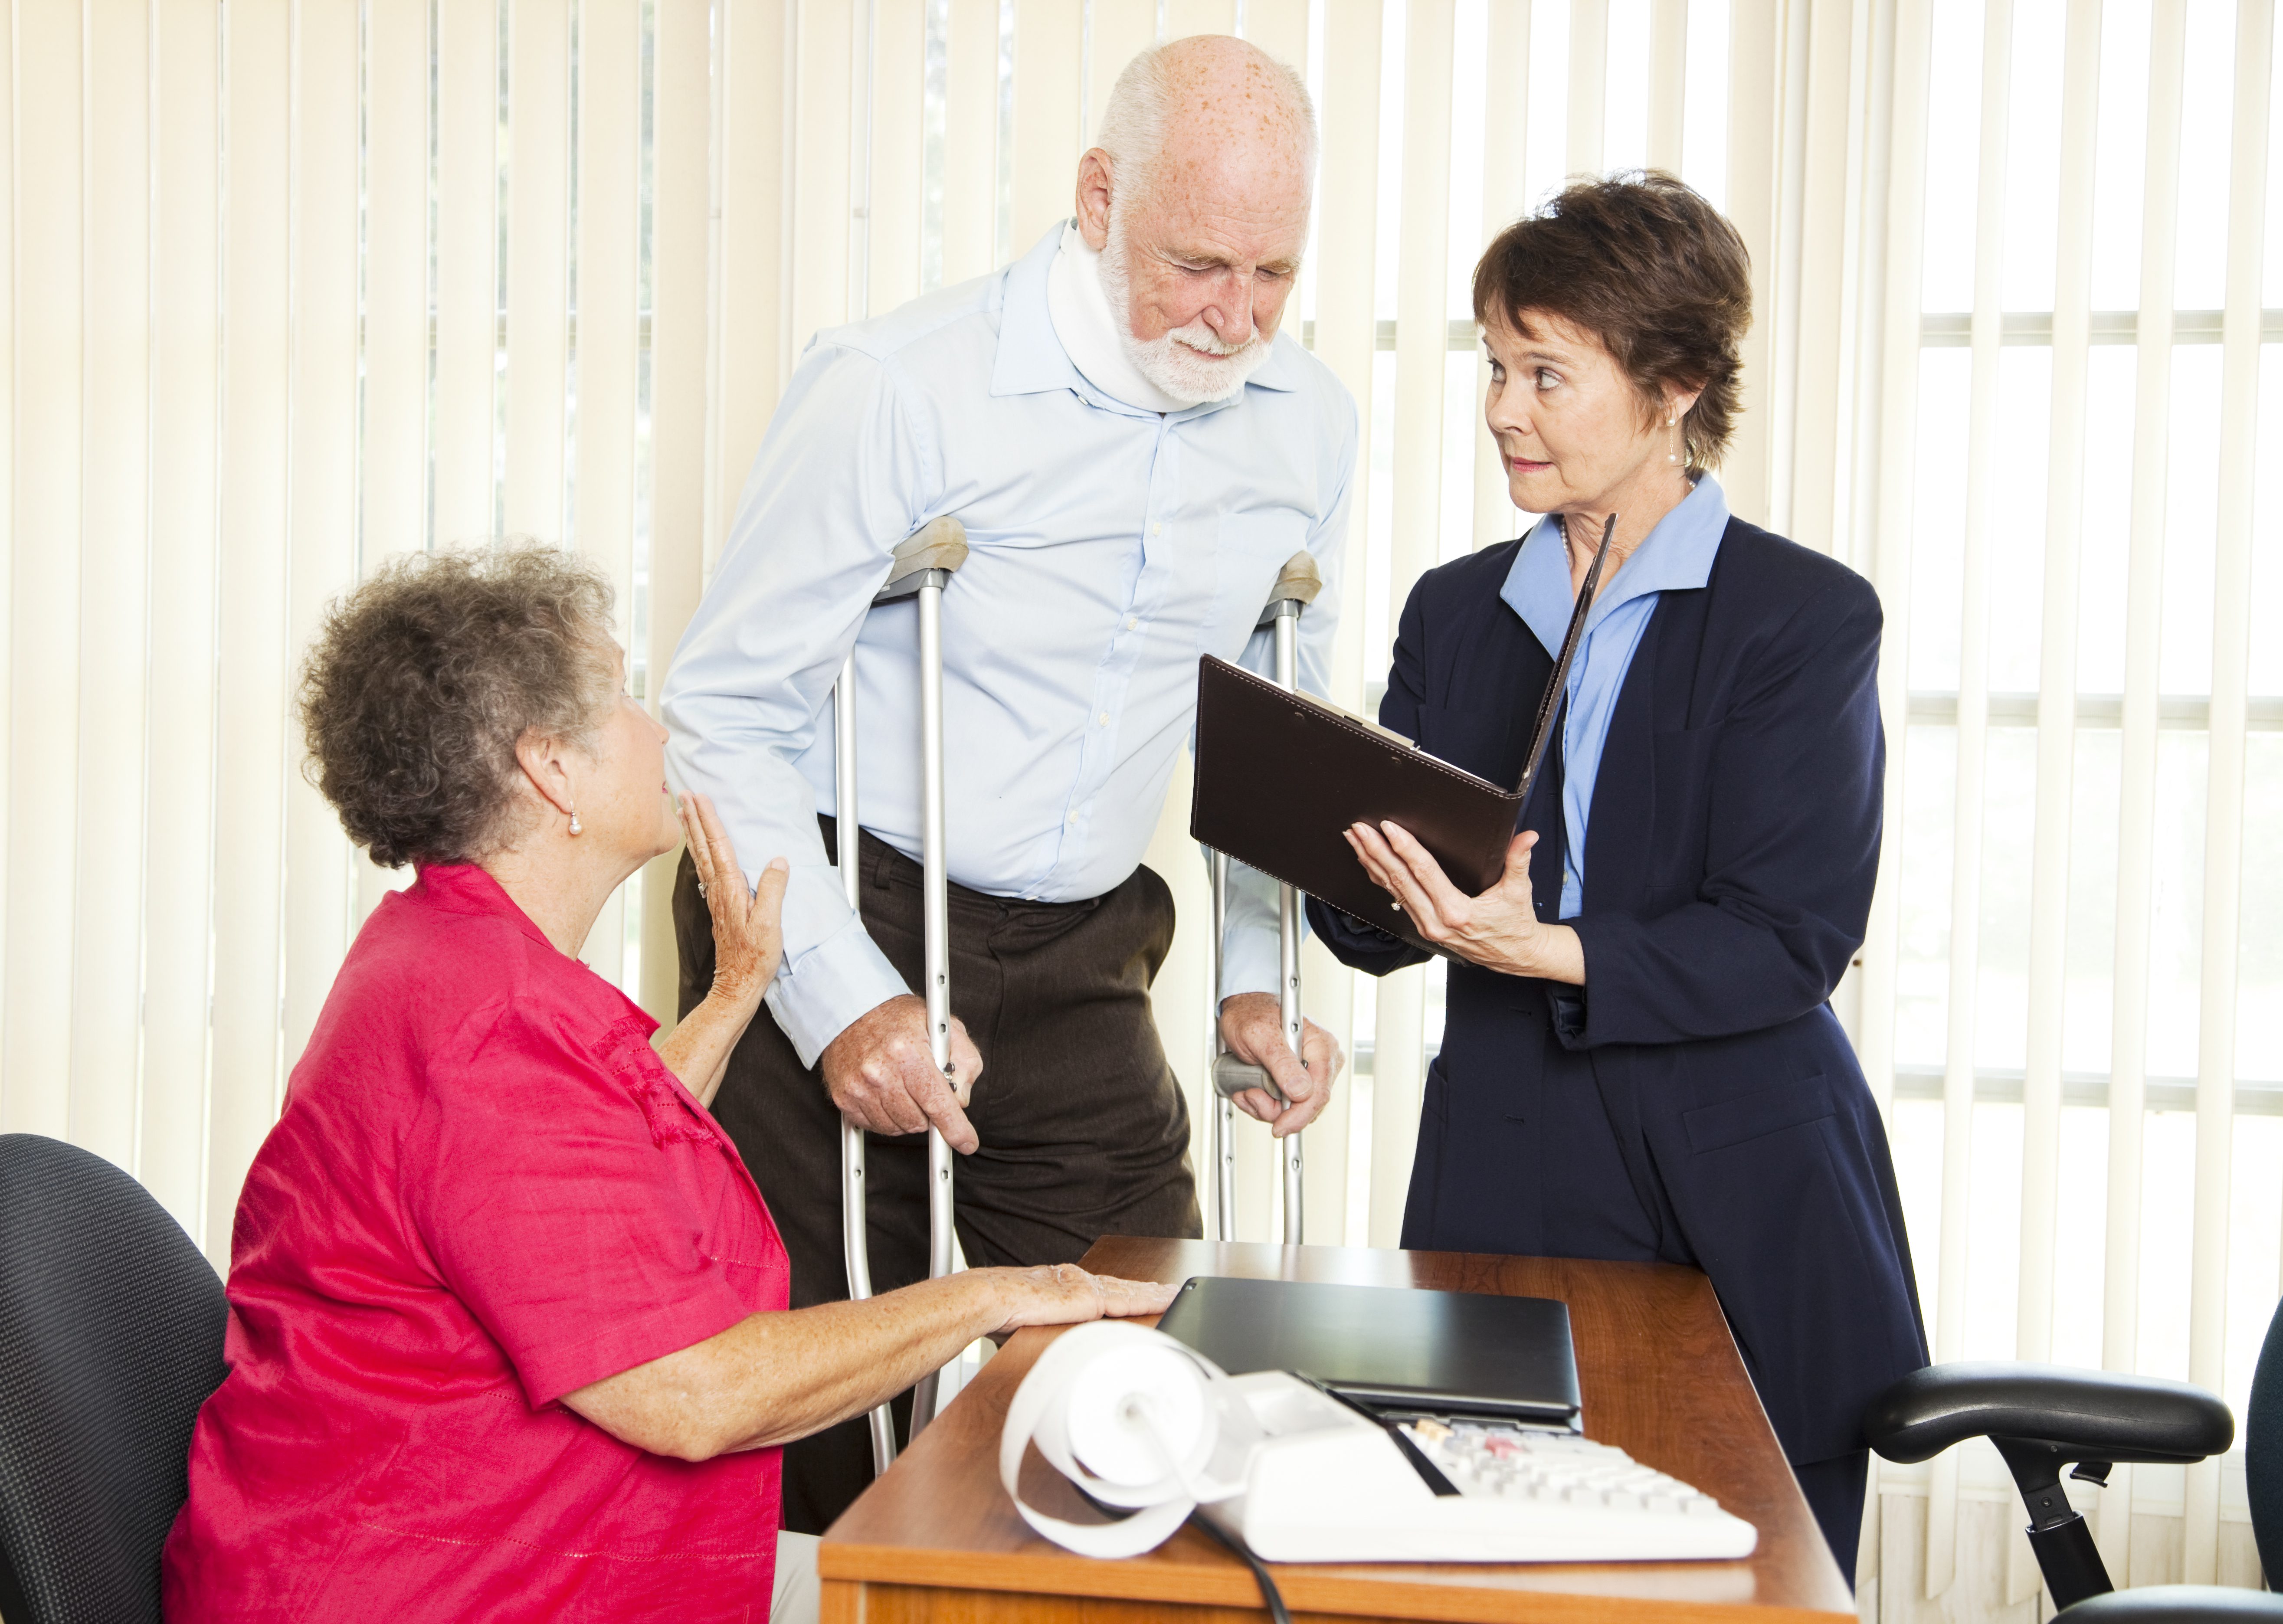 Stephen C. Carter, PC Attorney at Law | Hartwell, GA | injured man with crutches with wife meeting lawyer